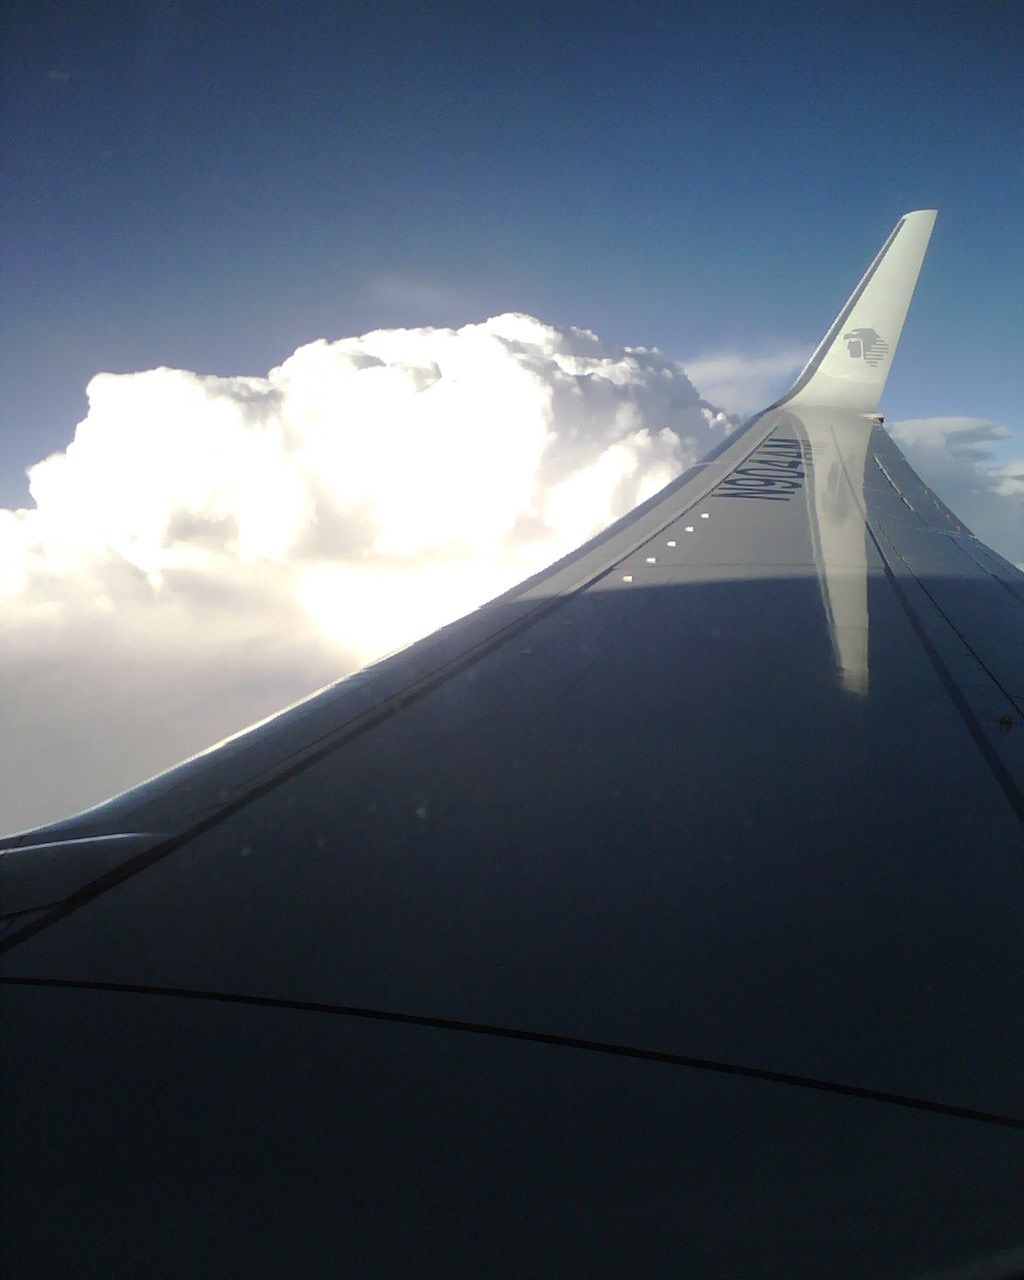 a view from the inside of a plane flying through a cloud filled sky